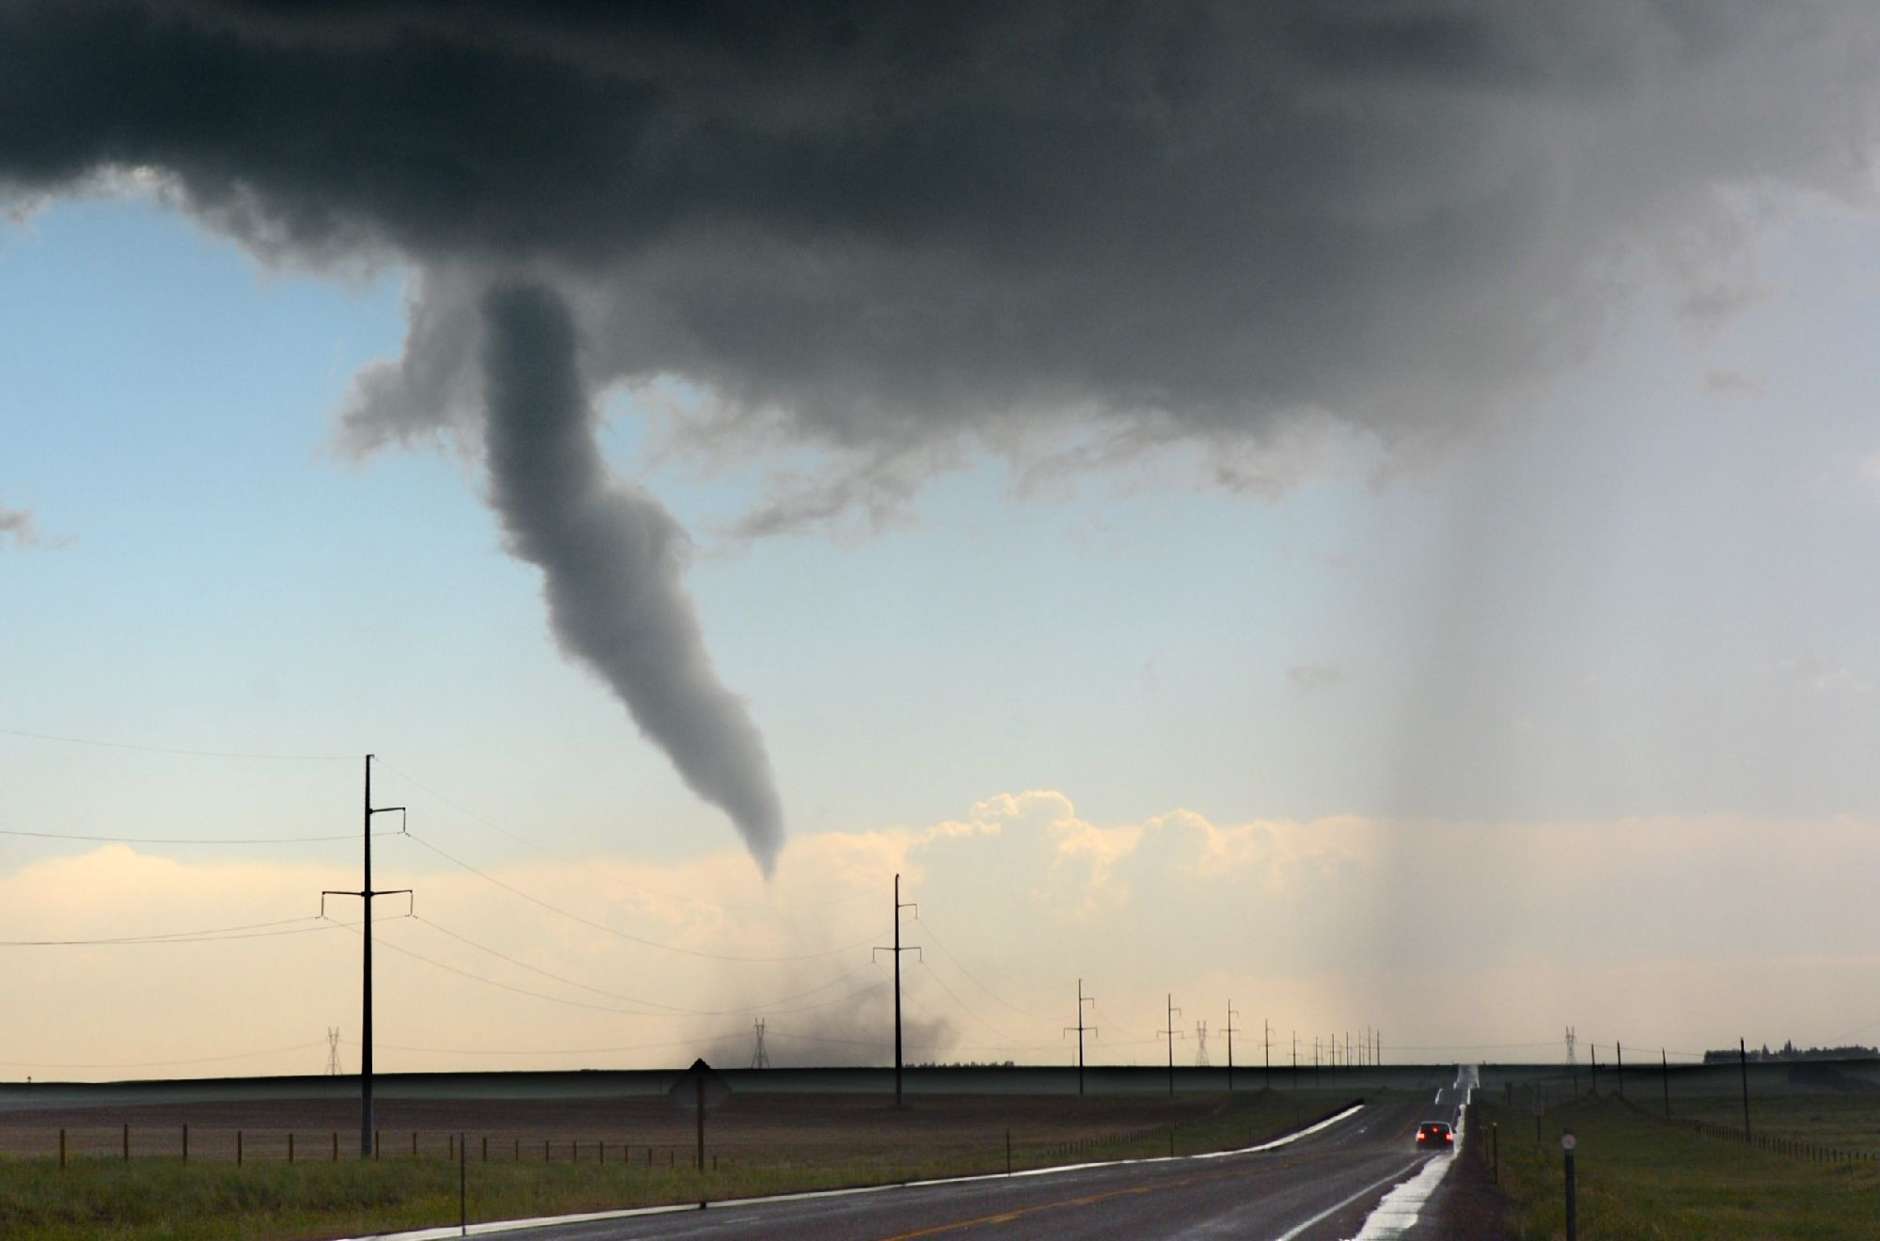 A tornado touched down about 10 miles northeast of Cheyenne along U.S. Highway 85 on Monday afternoon. (WTOP/Dave Dildine)